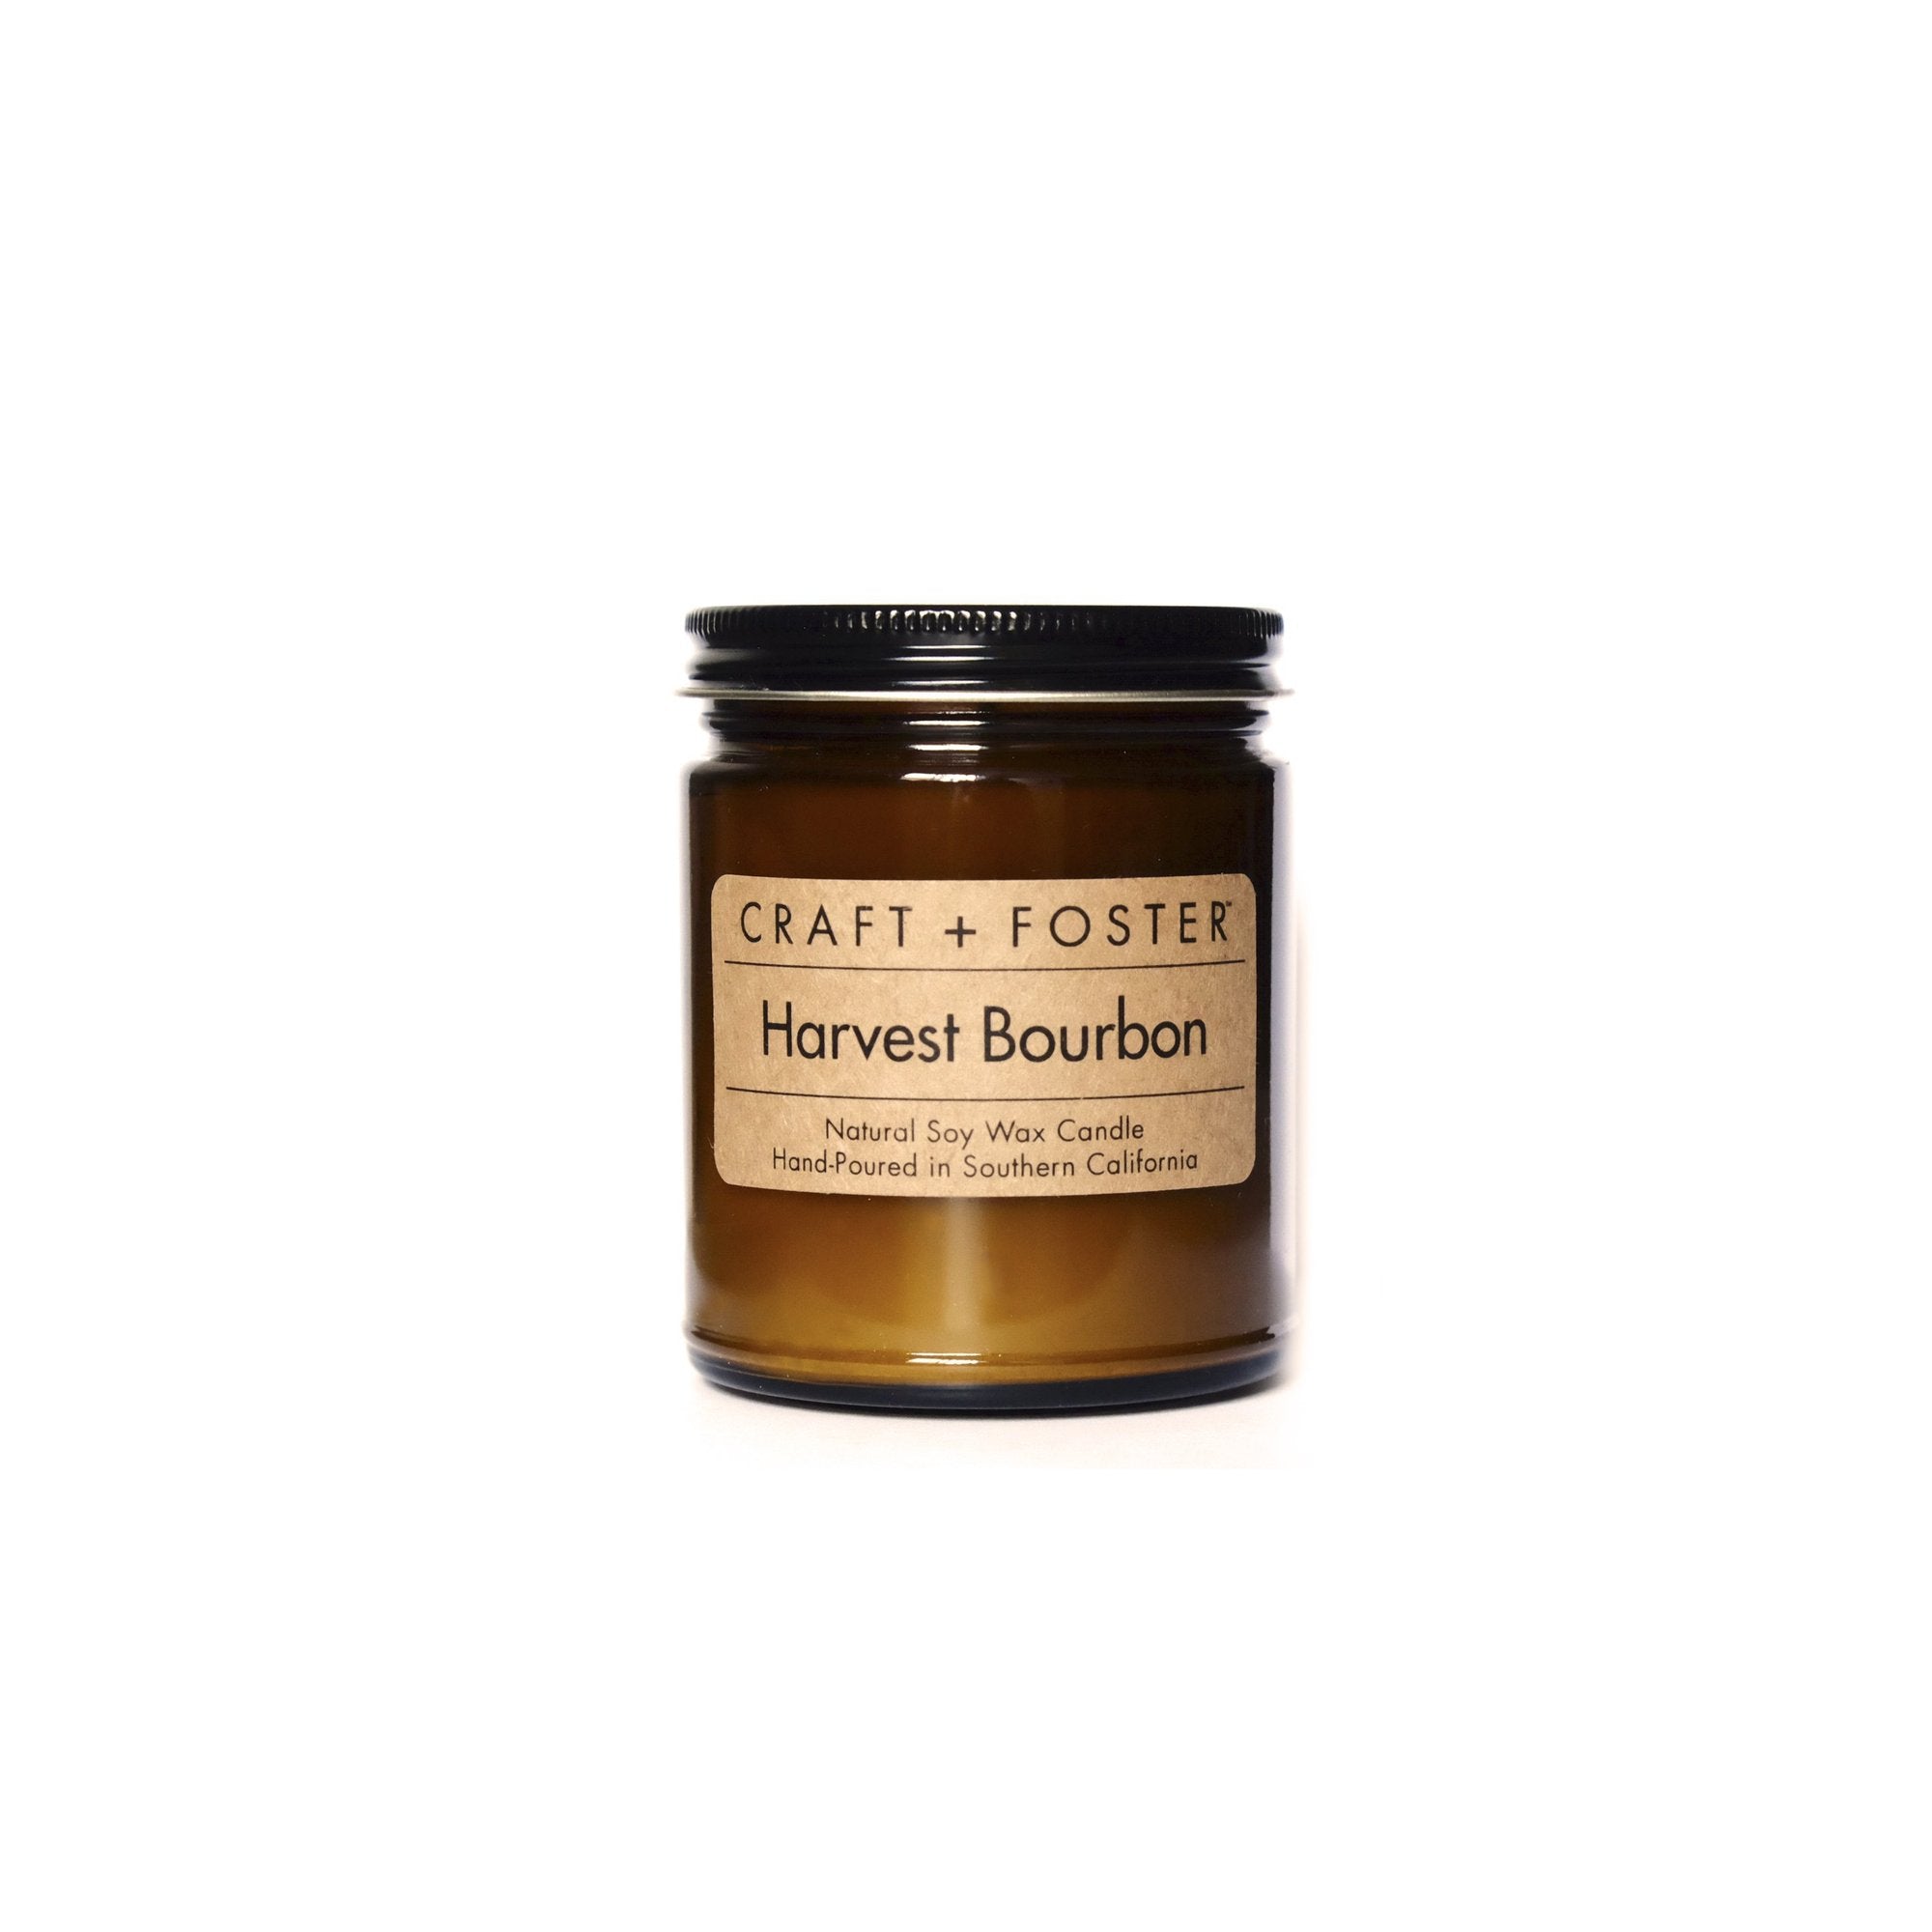 Natural Soy Wax Candle - Harvest Bourbon